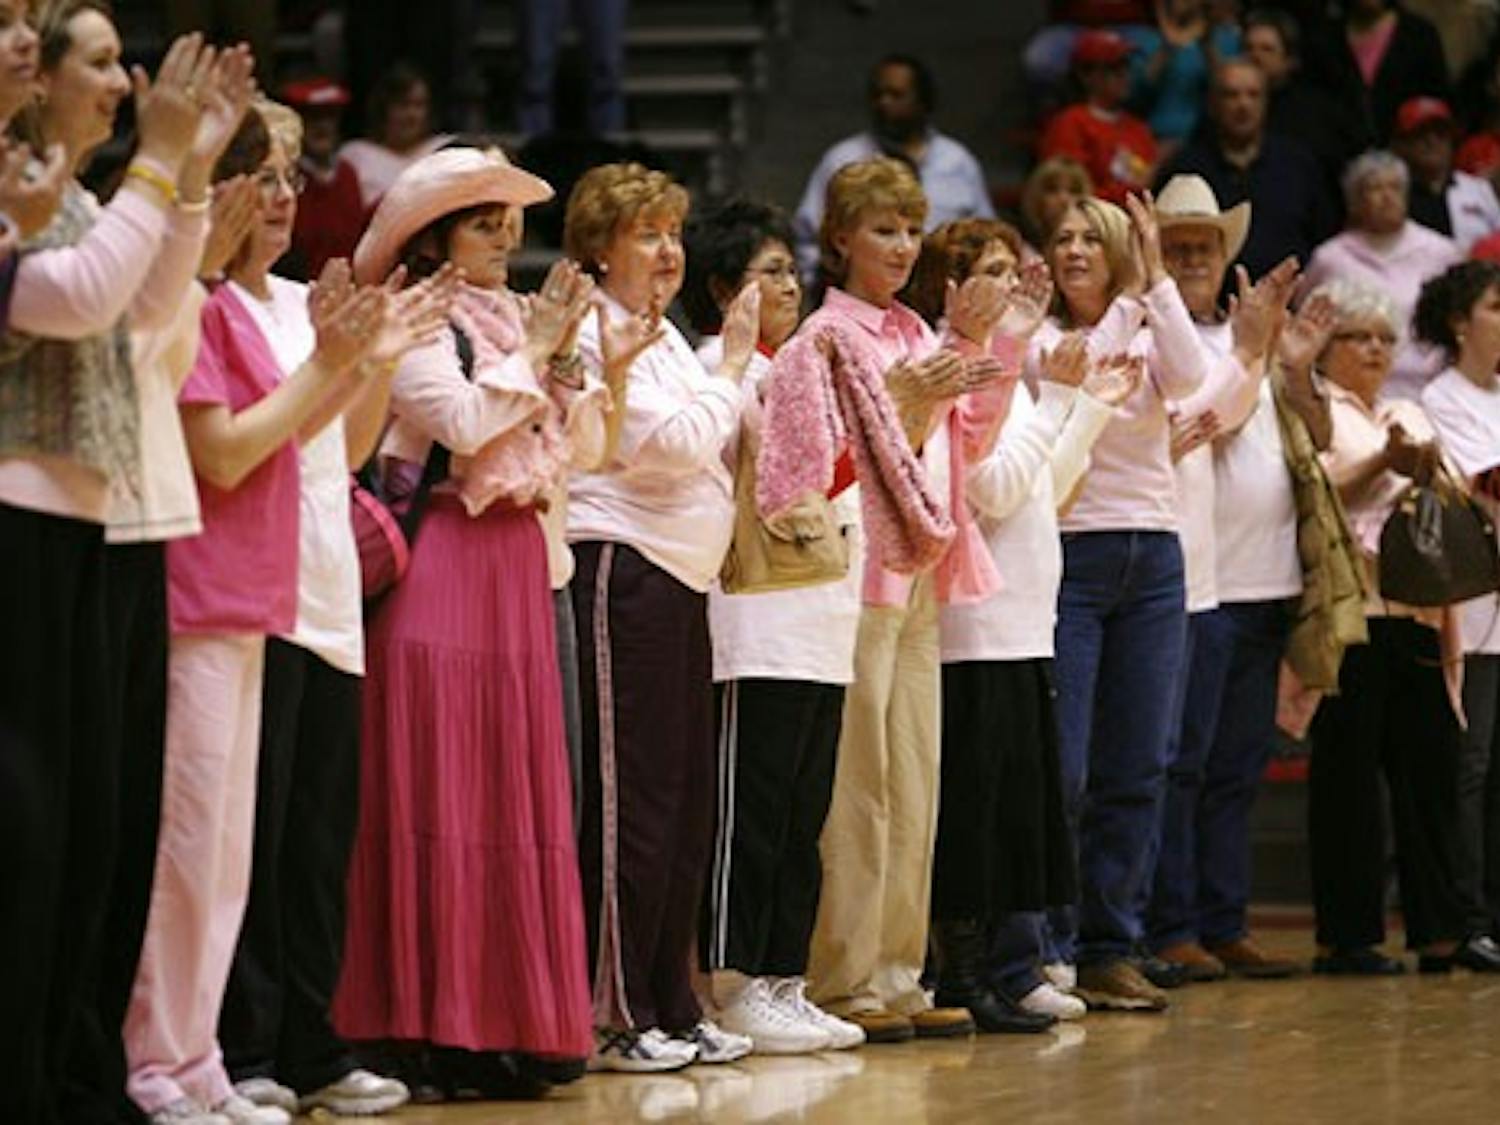 Cancer survivors applaud during halftime at Wednesday's game at The Pit.